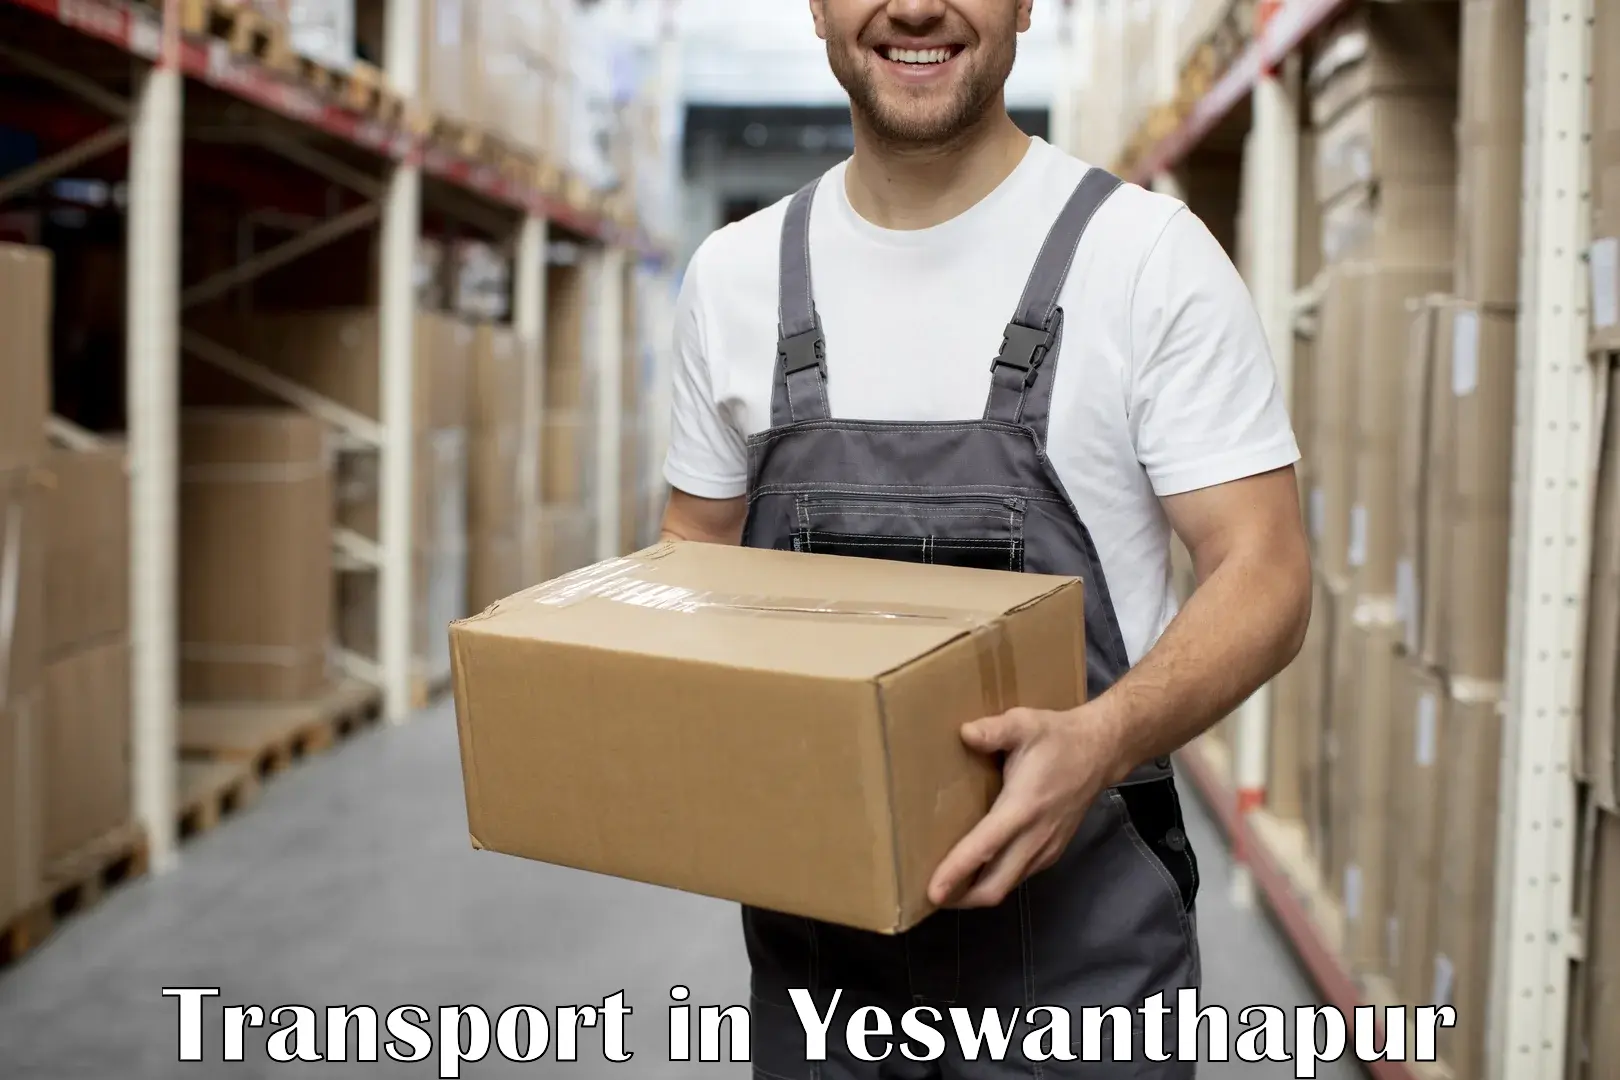 Container transport service in Yeswanthapur